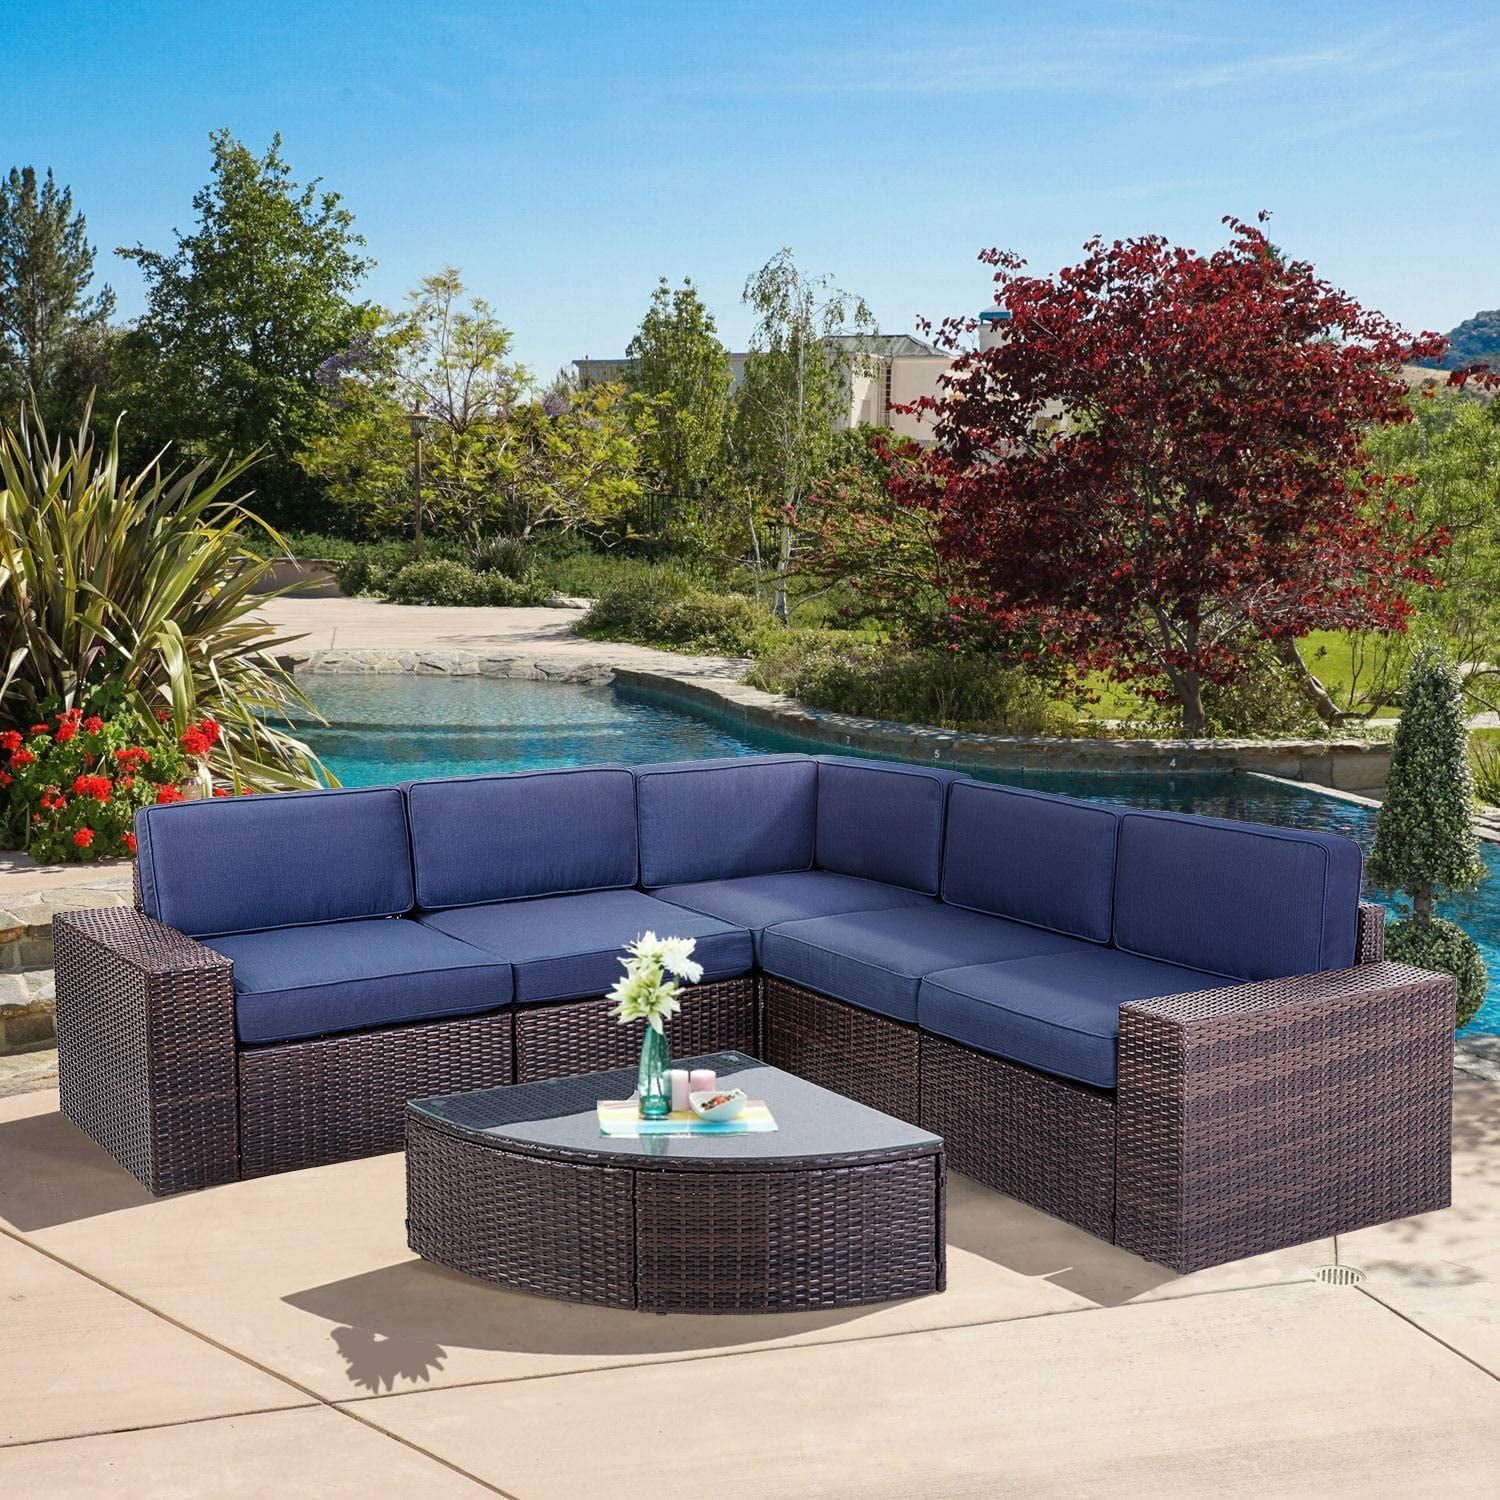 SUNCROWN Outdoor Furniture 6Piece Patio Sofa and Wedge